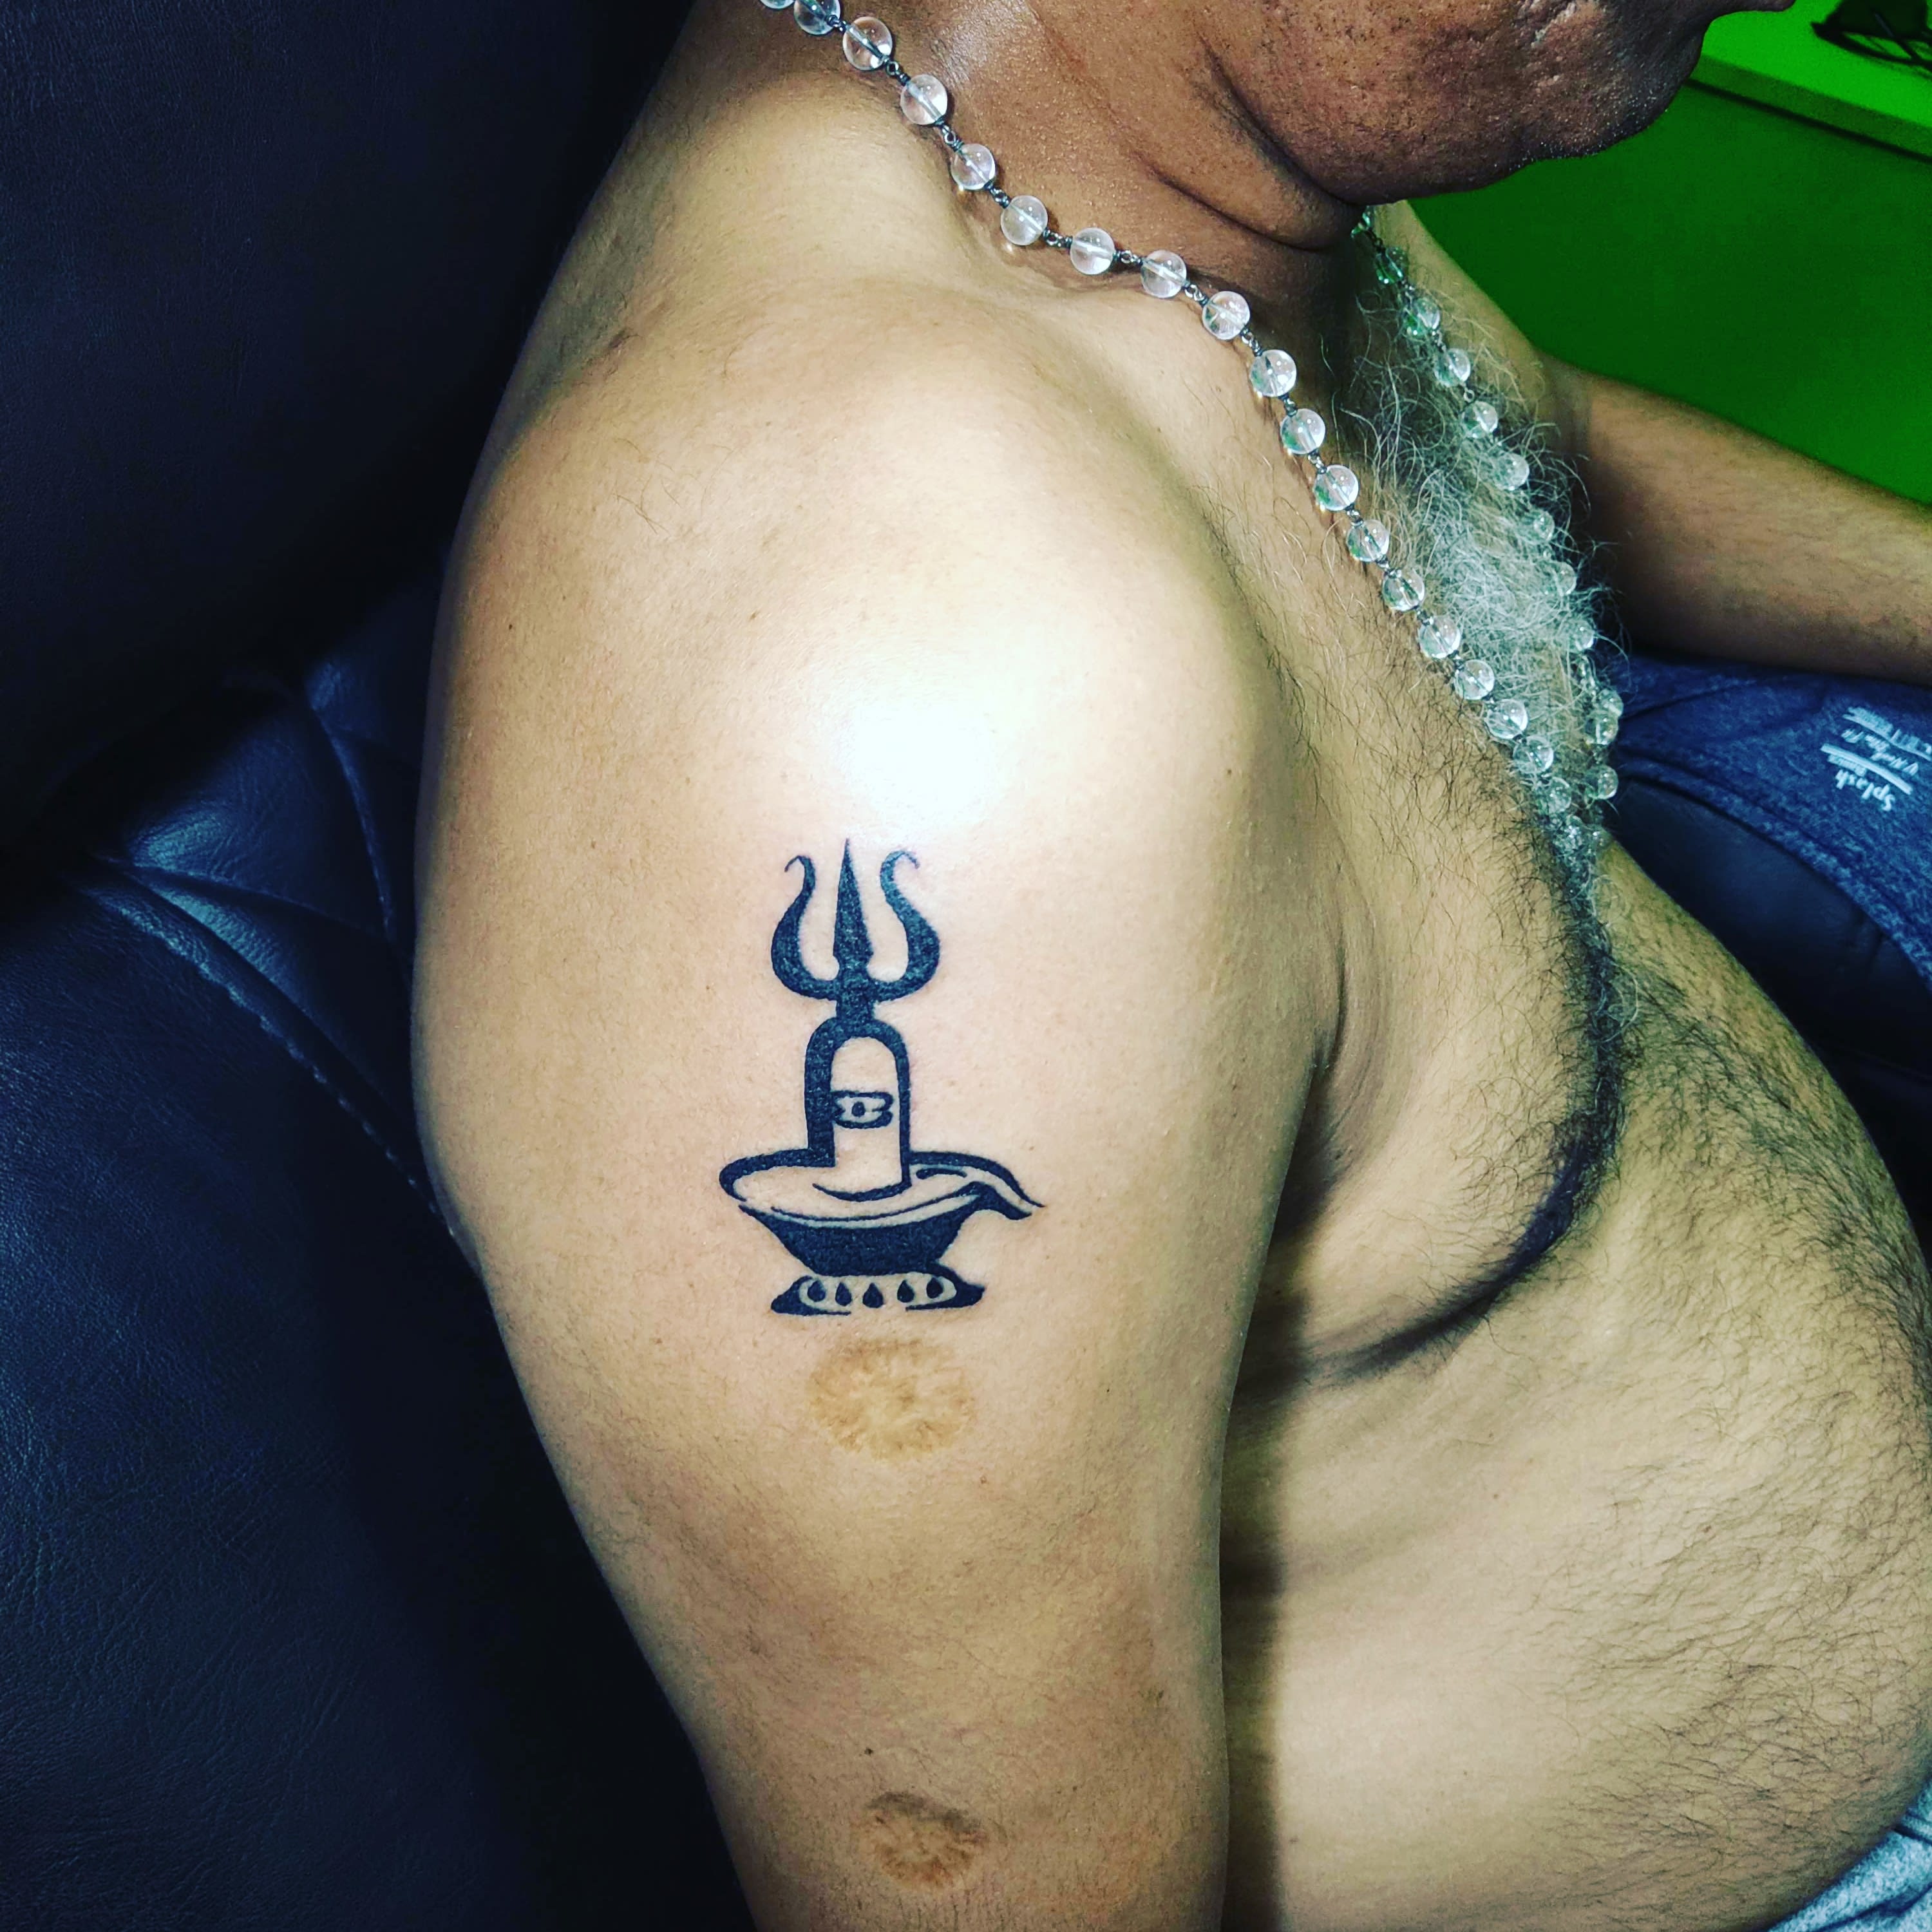 Rascal Ink Tattoo Studio on Instagram Lord Shiva rides on Nandi the  bull It means that Nandi is the vehicle of Lord Shiva According to Hindu  dharma Nandi is considered to